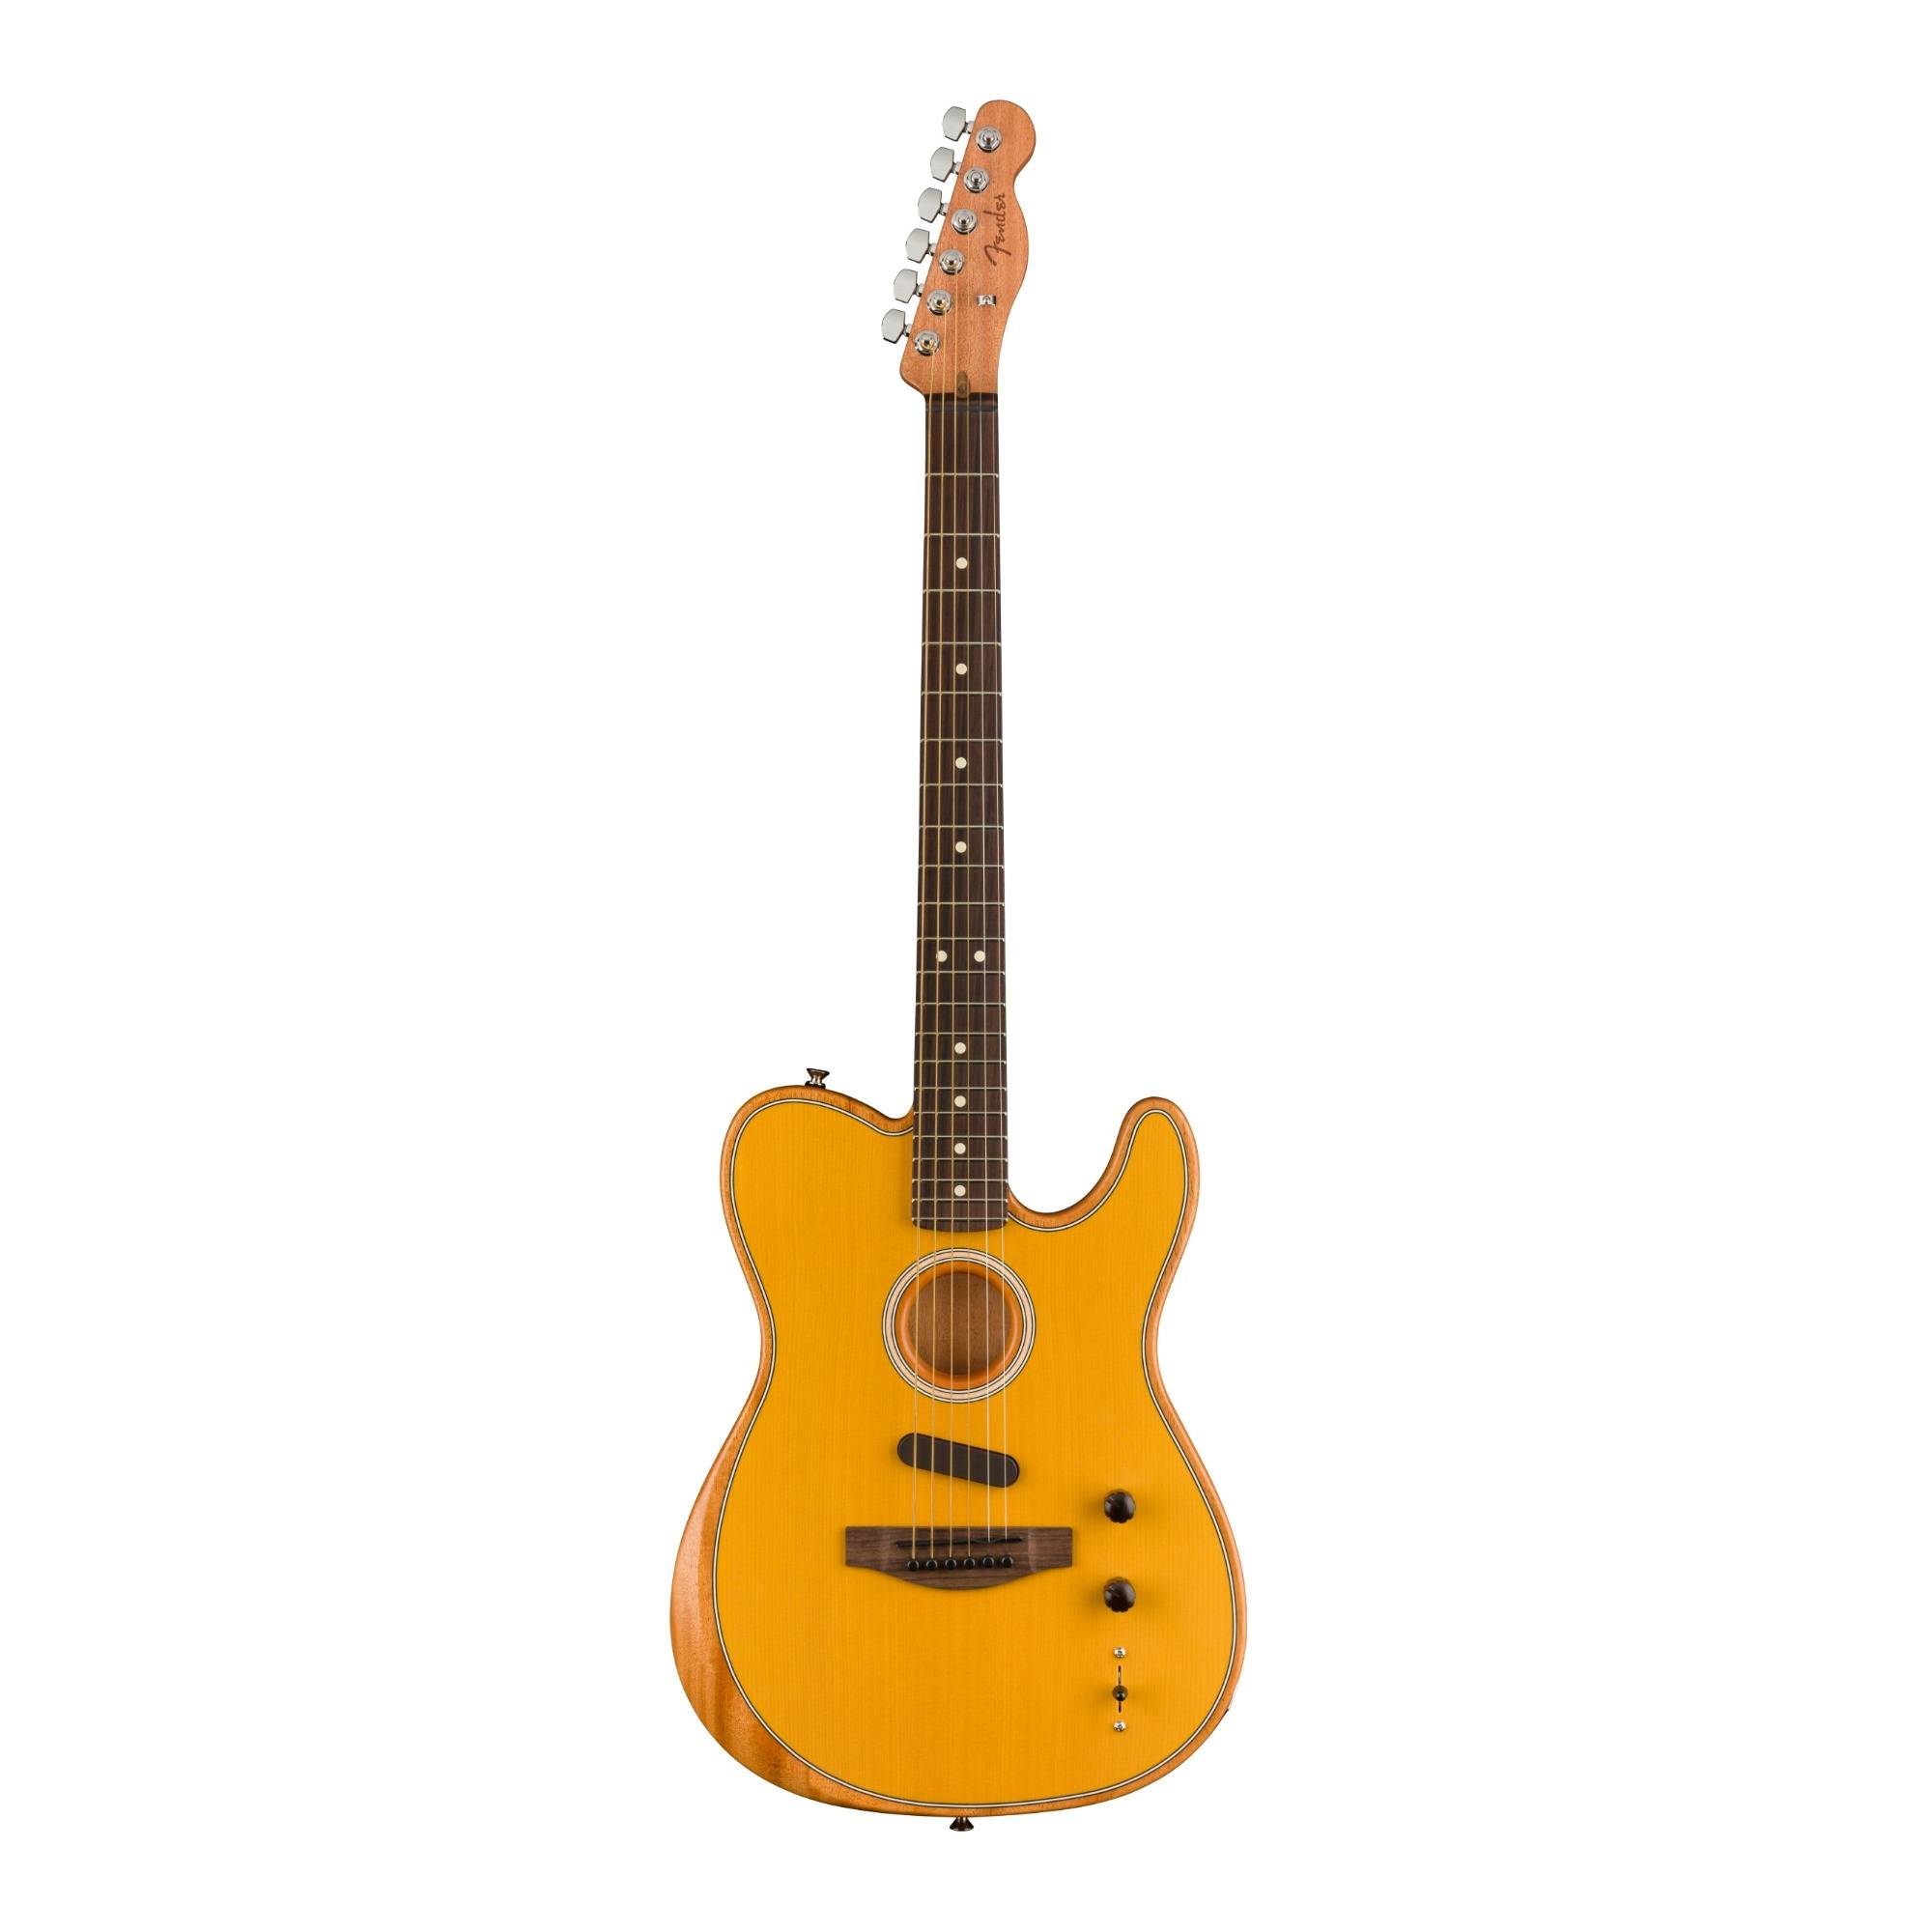 Fender Acoustasonic Player Telecaster Acoustic-Electric Guitar (Right-Hand, Butterscotch Blonde)